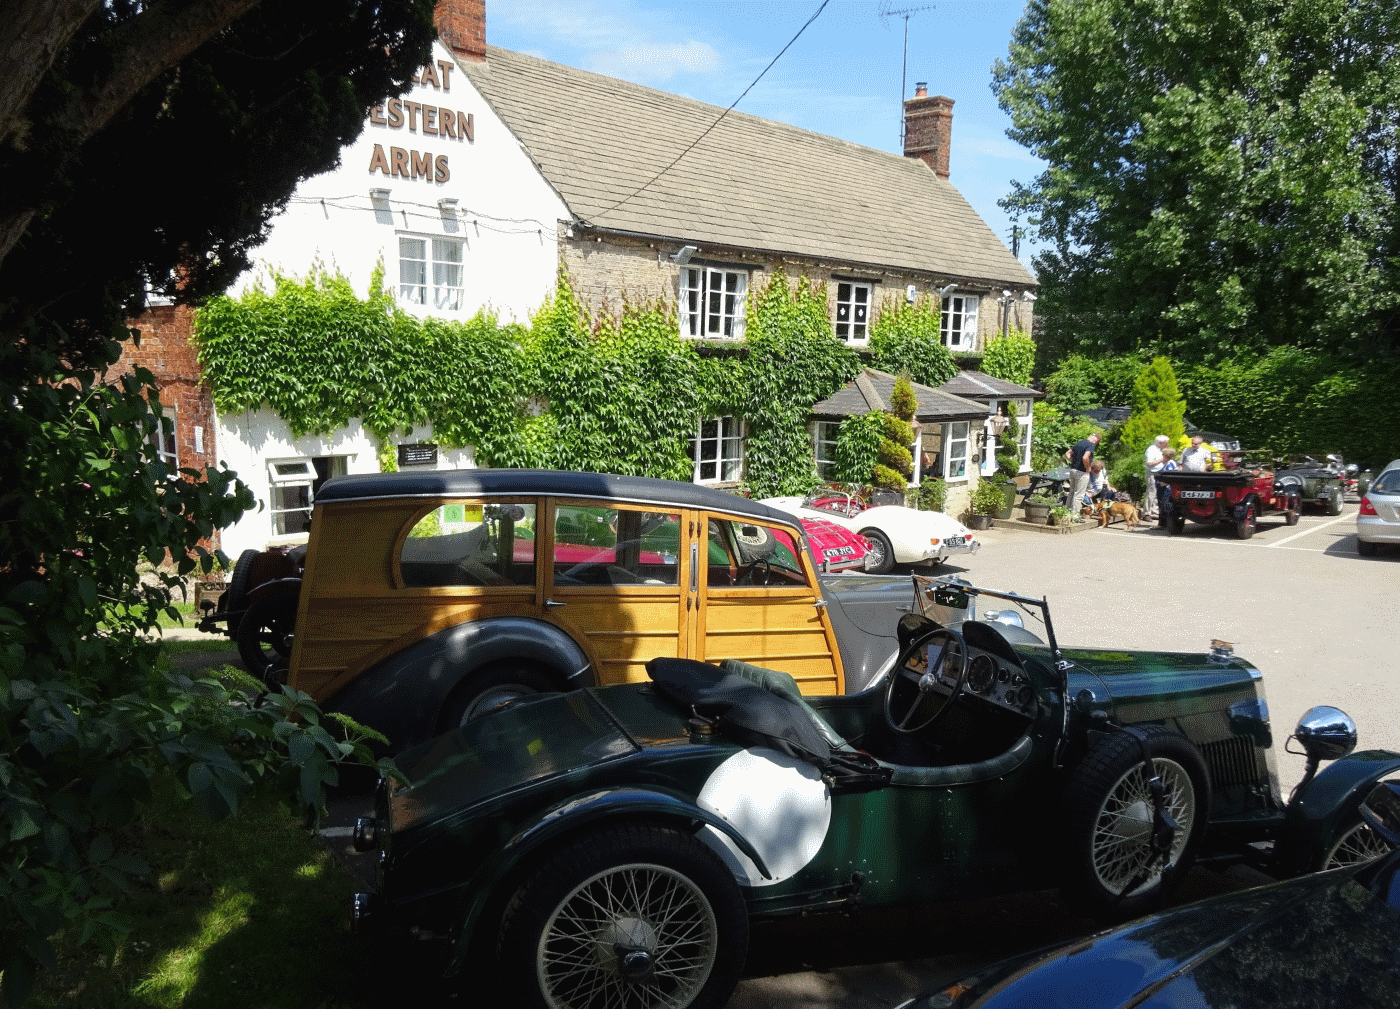 Lea-Francis Cars outside the Great Eastern Arms at Aynho